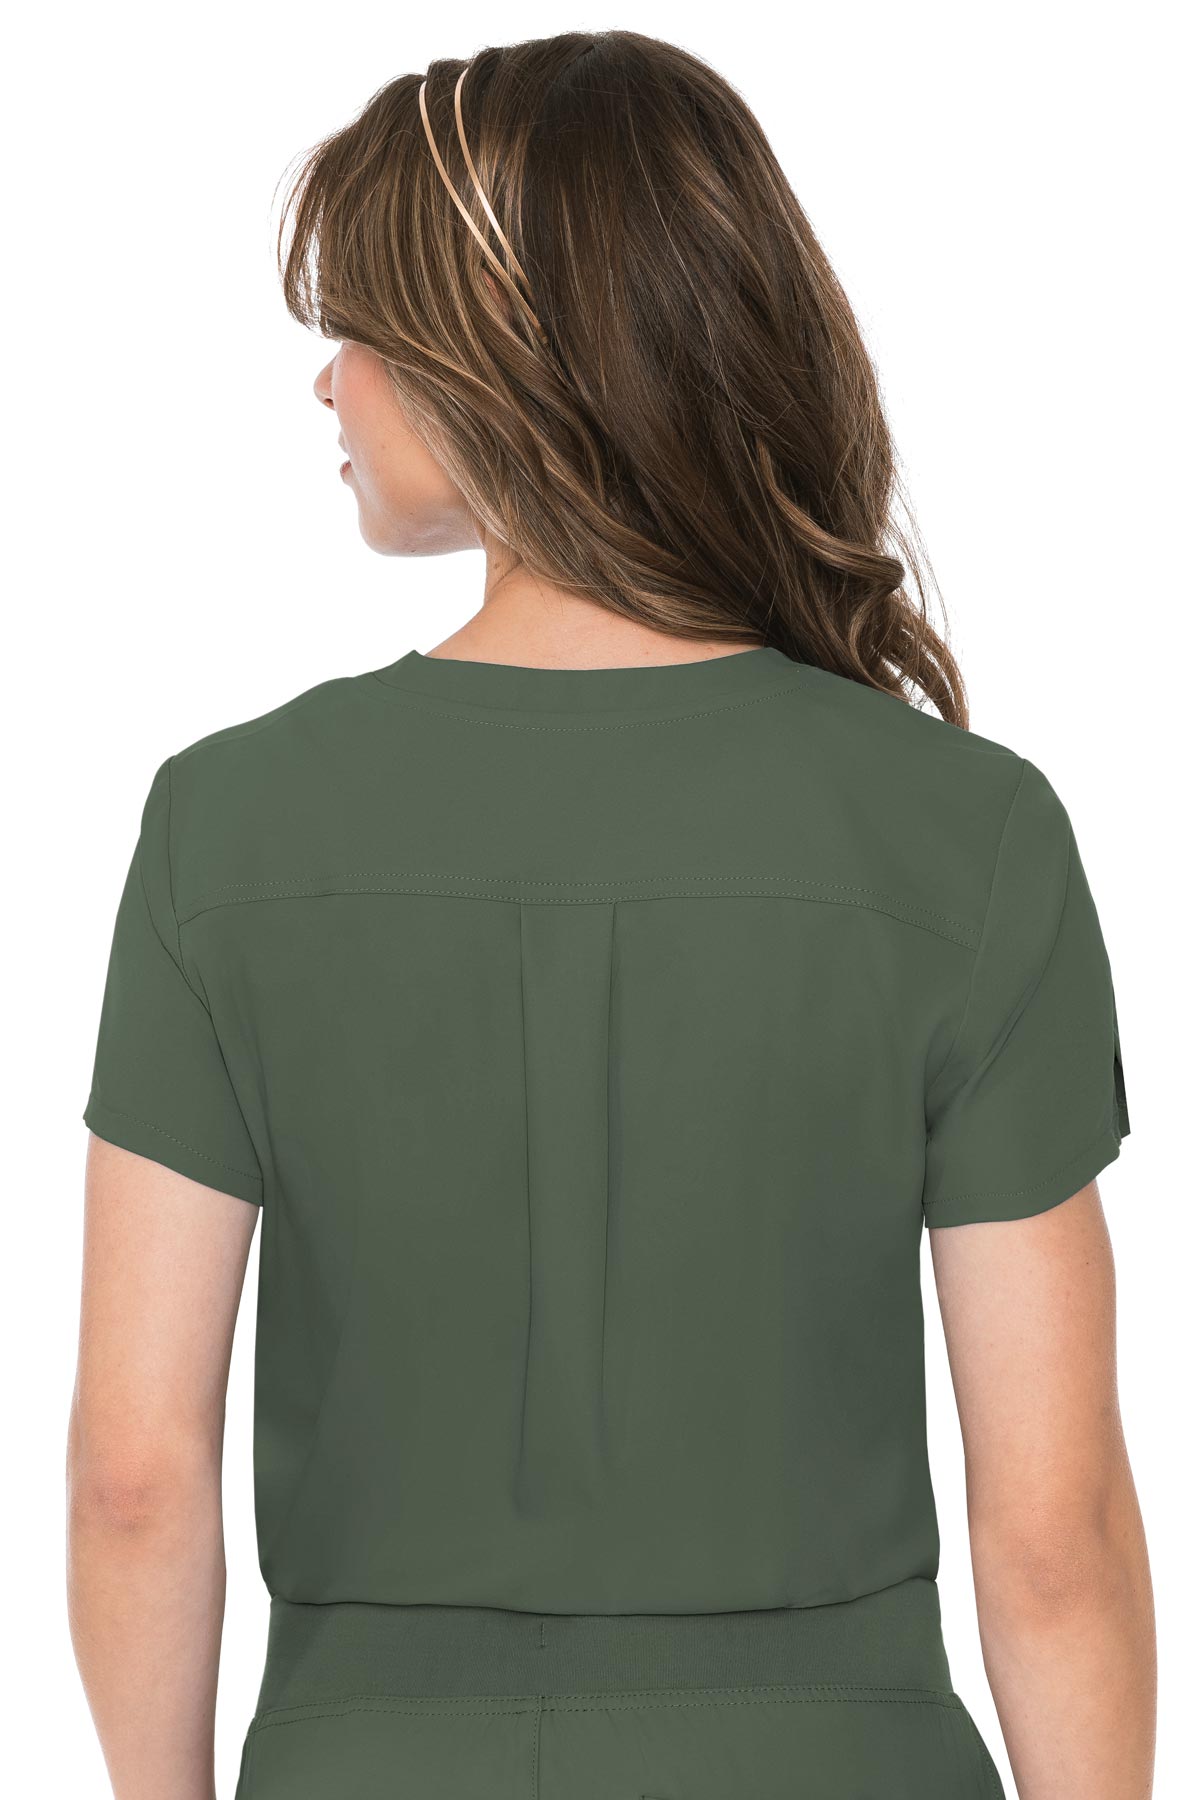 Med Couture 2432 Insight 1 Pocket Tuck-In Top Olive Back